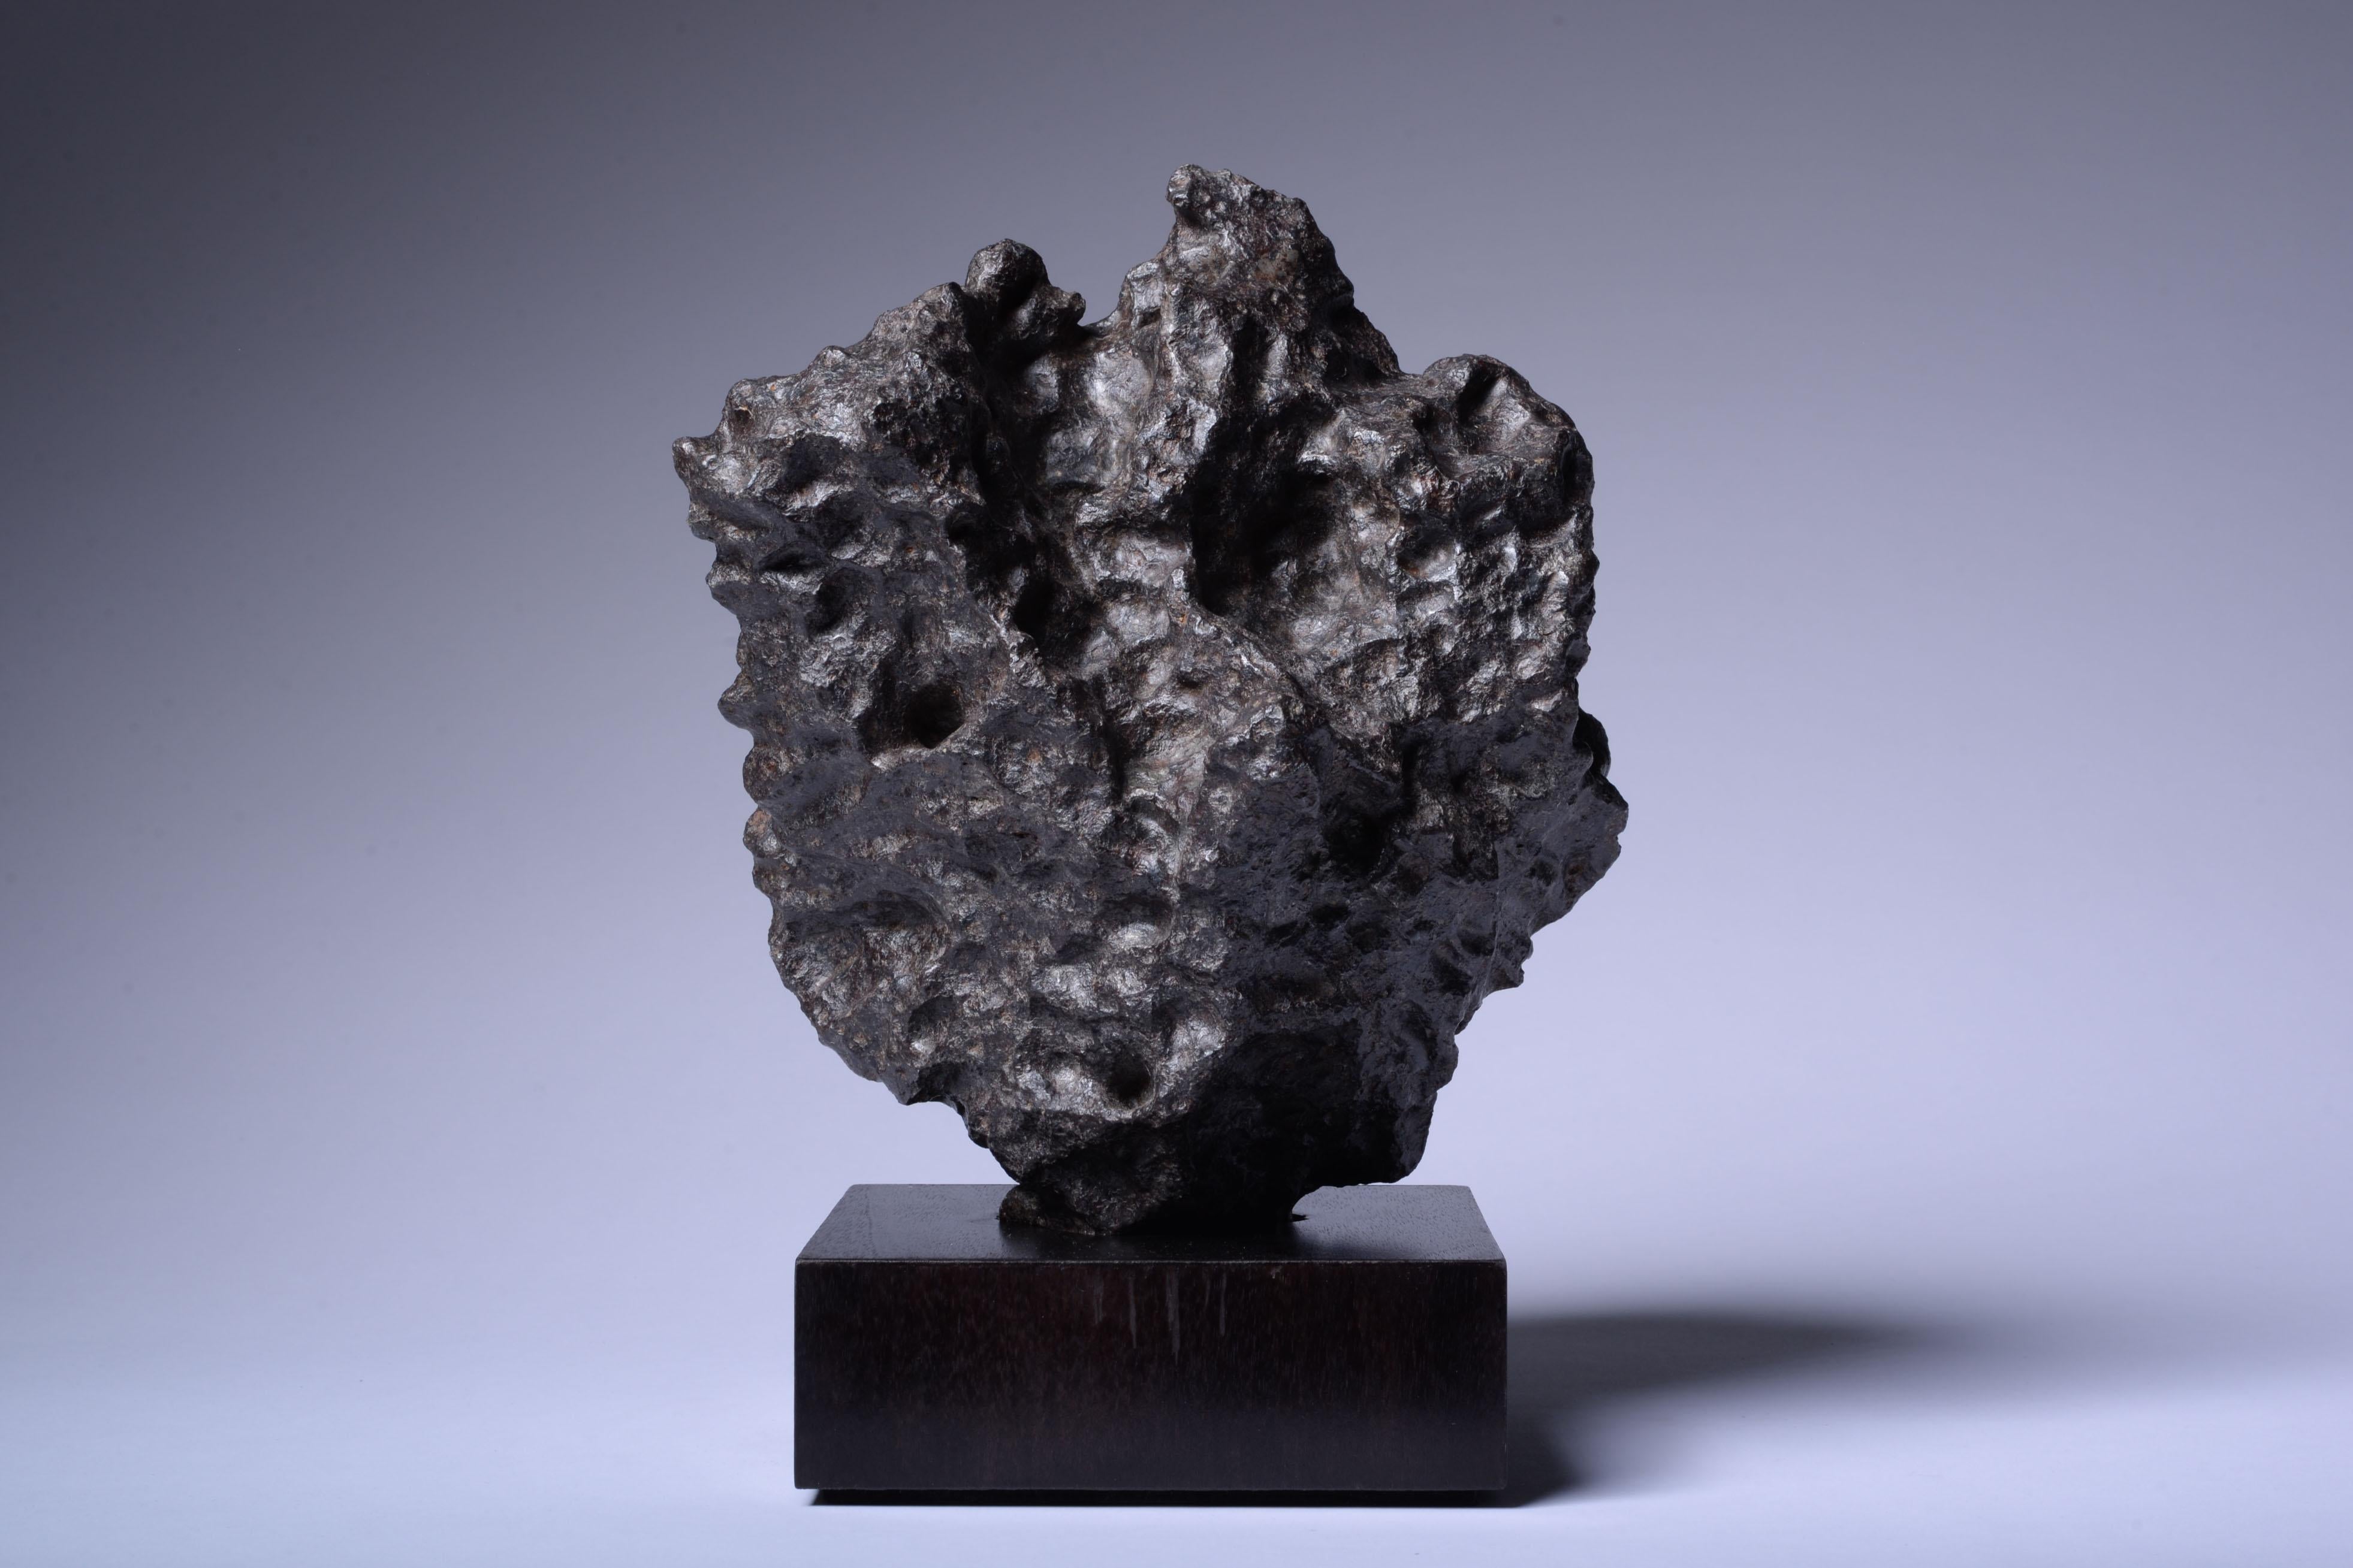 Iron Meteorite from Morasko, Poland
Circa 4.55 Billion y/o
Iron, IAB-MG

A sculptural iron meteorite dating to the formation of the solar system, some 4.55 billion years ago, recovered from the Morasko meteorite nature reserve, Poznan, Western